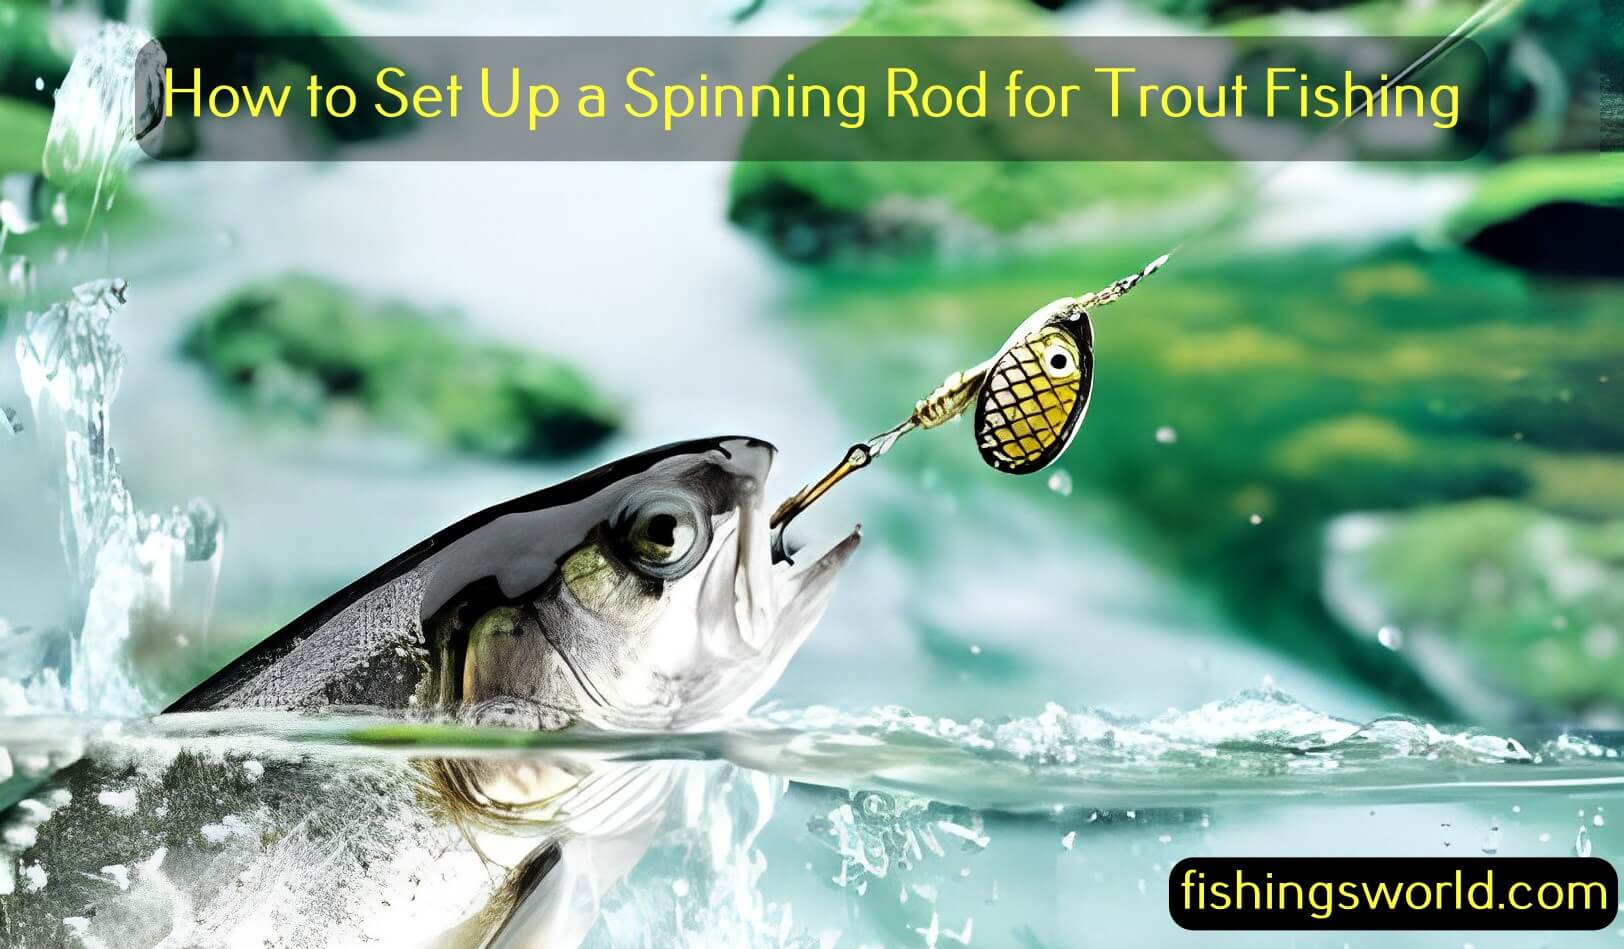 How to Set Up a Spinning Rod for Trout Fishing